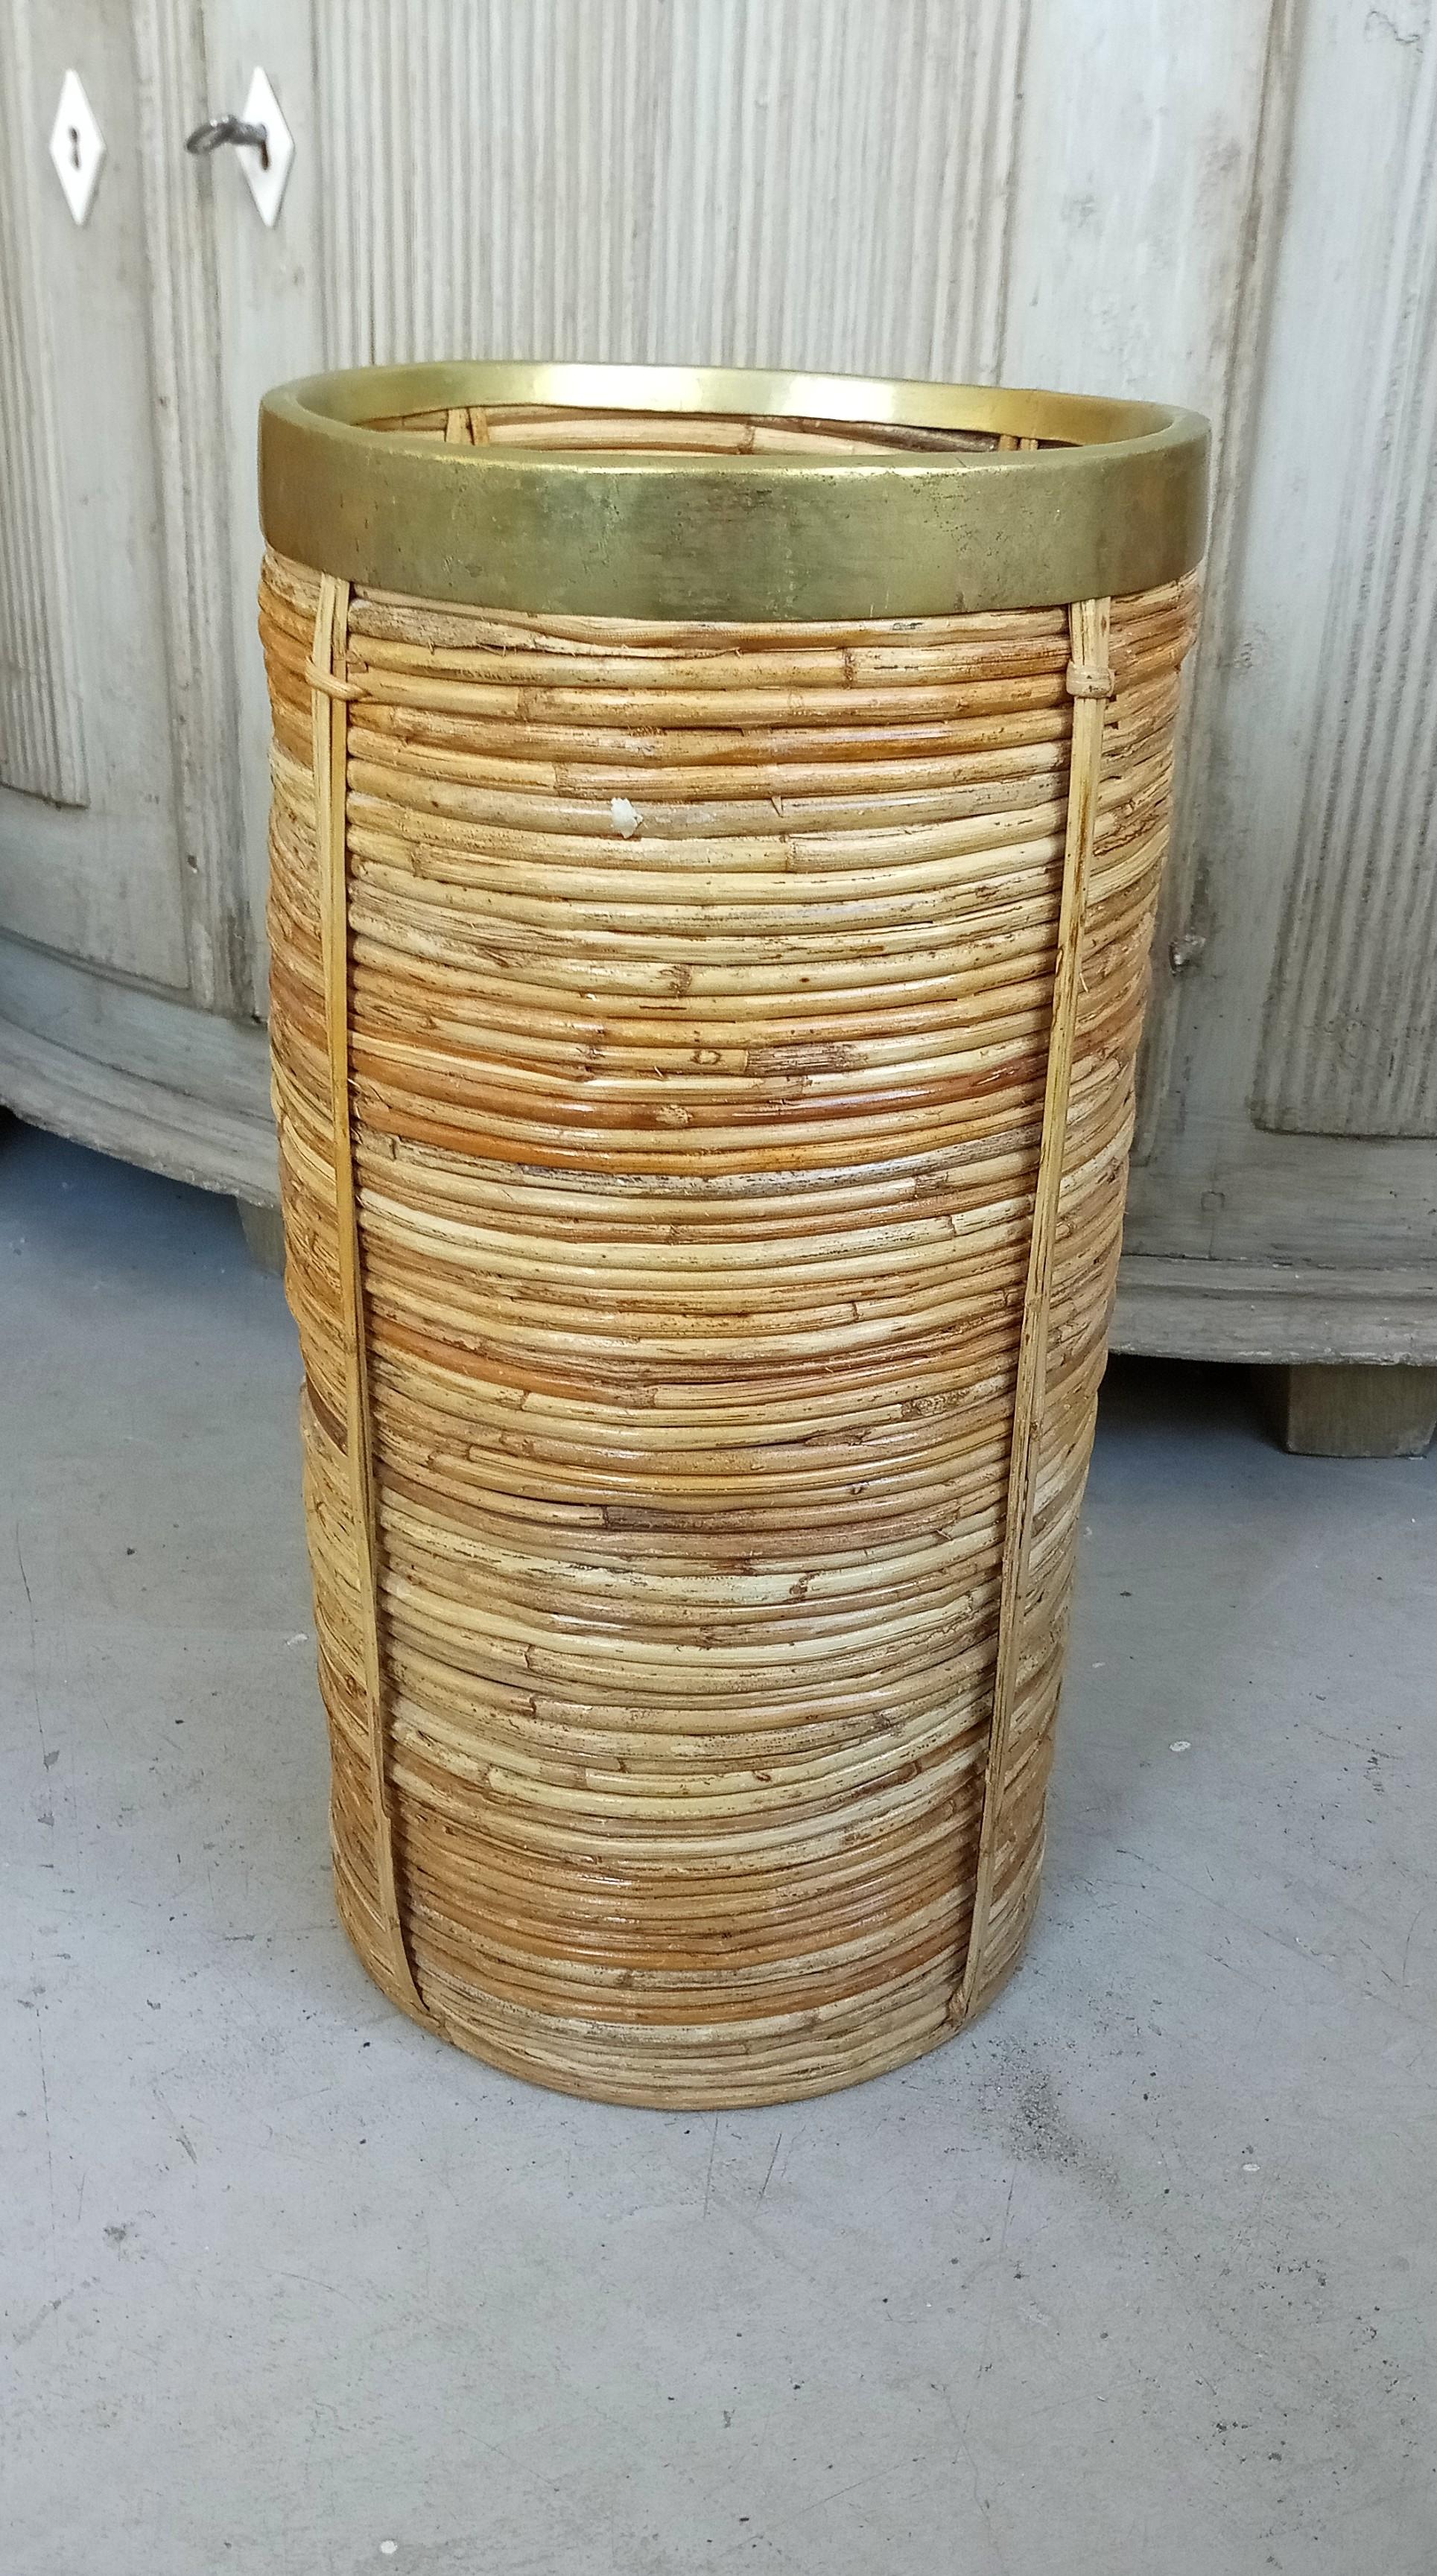 Decorative Bamboo Umbrella stand attr. by Gabriella Crespi in used condition.
Material: Brass and Bamboo
Size: H: 42 cm x D: 21 cm